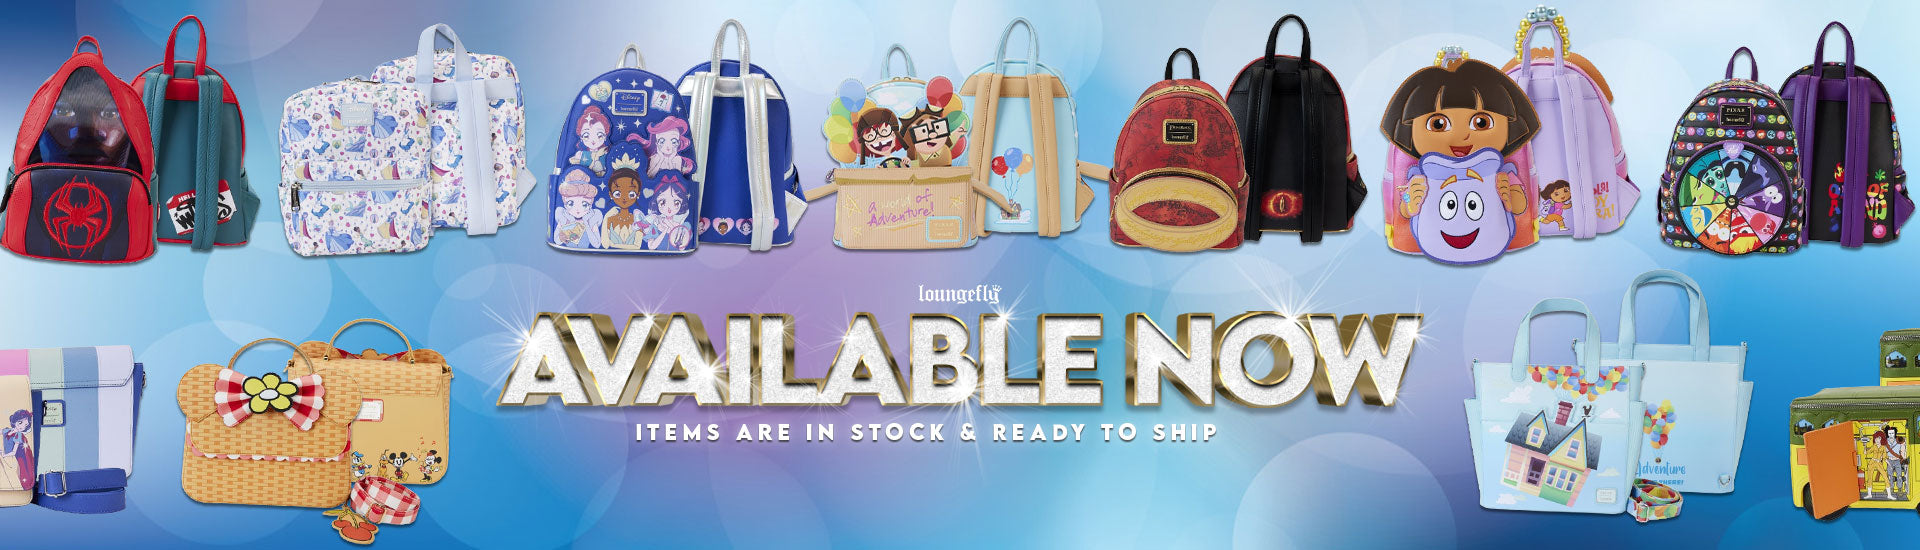 New Loungefly Collection is in stock and ready to ship featuring bags from your favorite fandoms like Up, Lord of the Rings, Disney Princesses, Dora the Explorer and more!